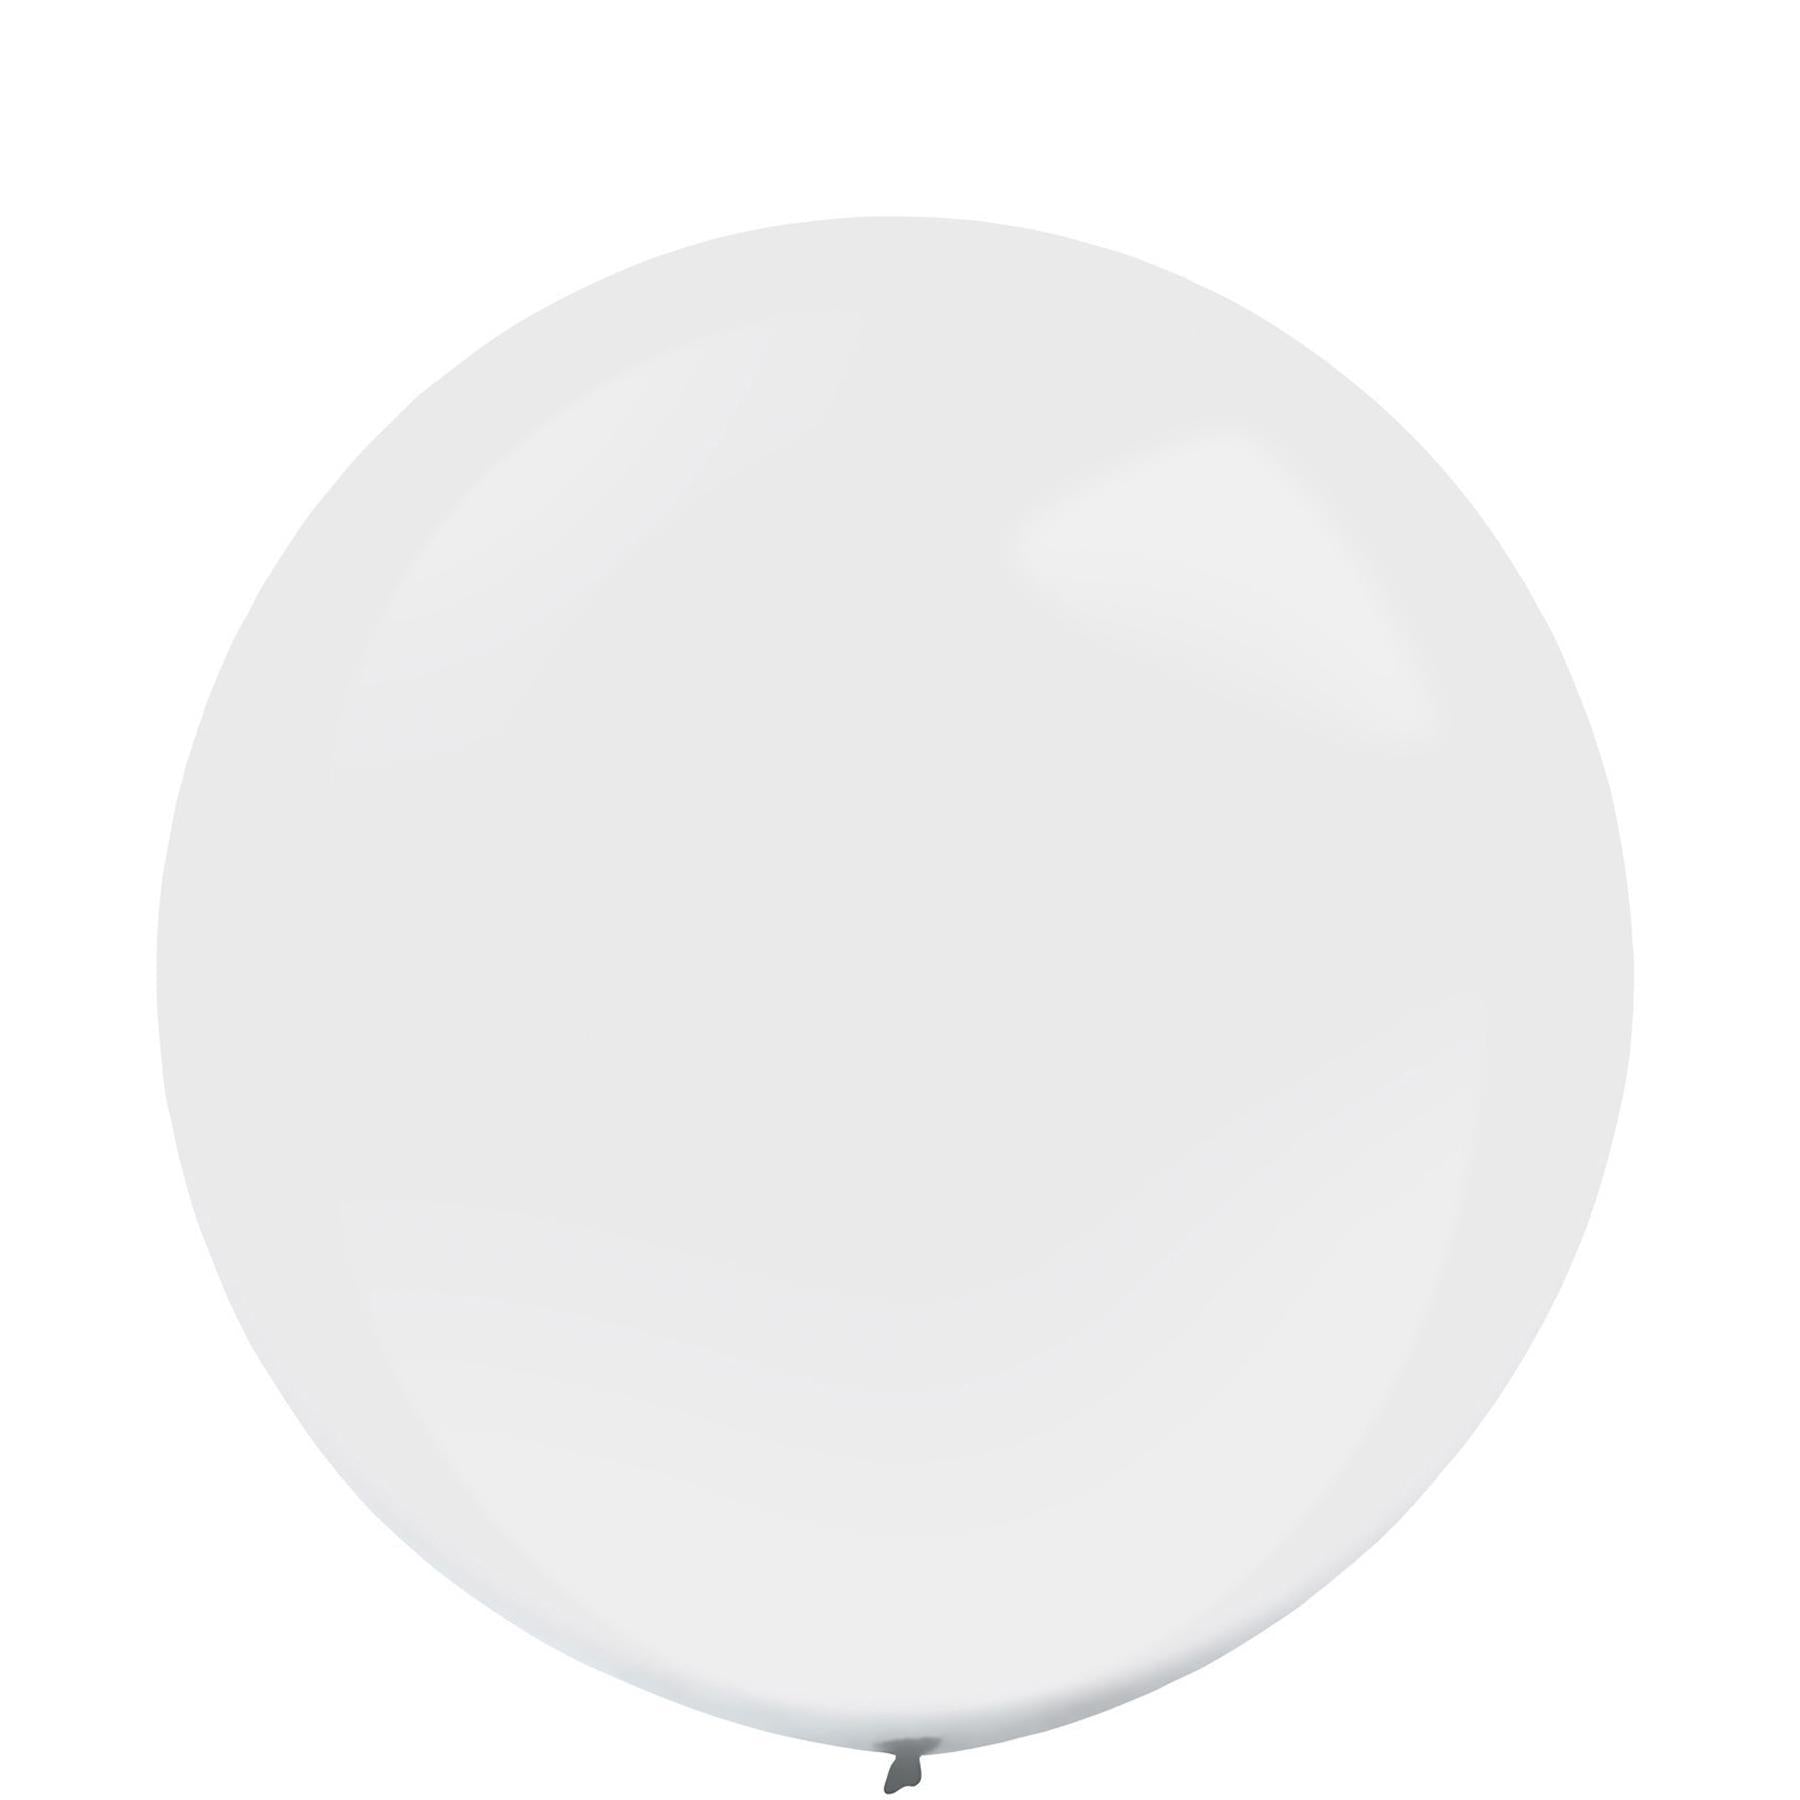 Frosty White Standard Latex Balloons 24in, 4pcs Balloons & Streamers - Party Centre - Party Centre